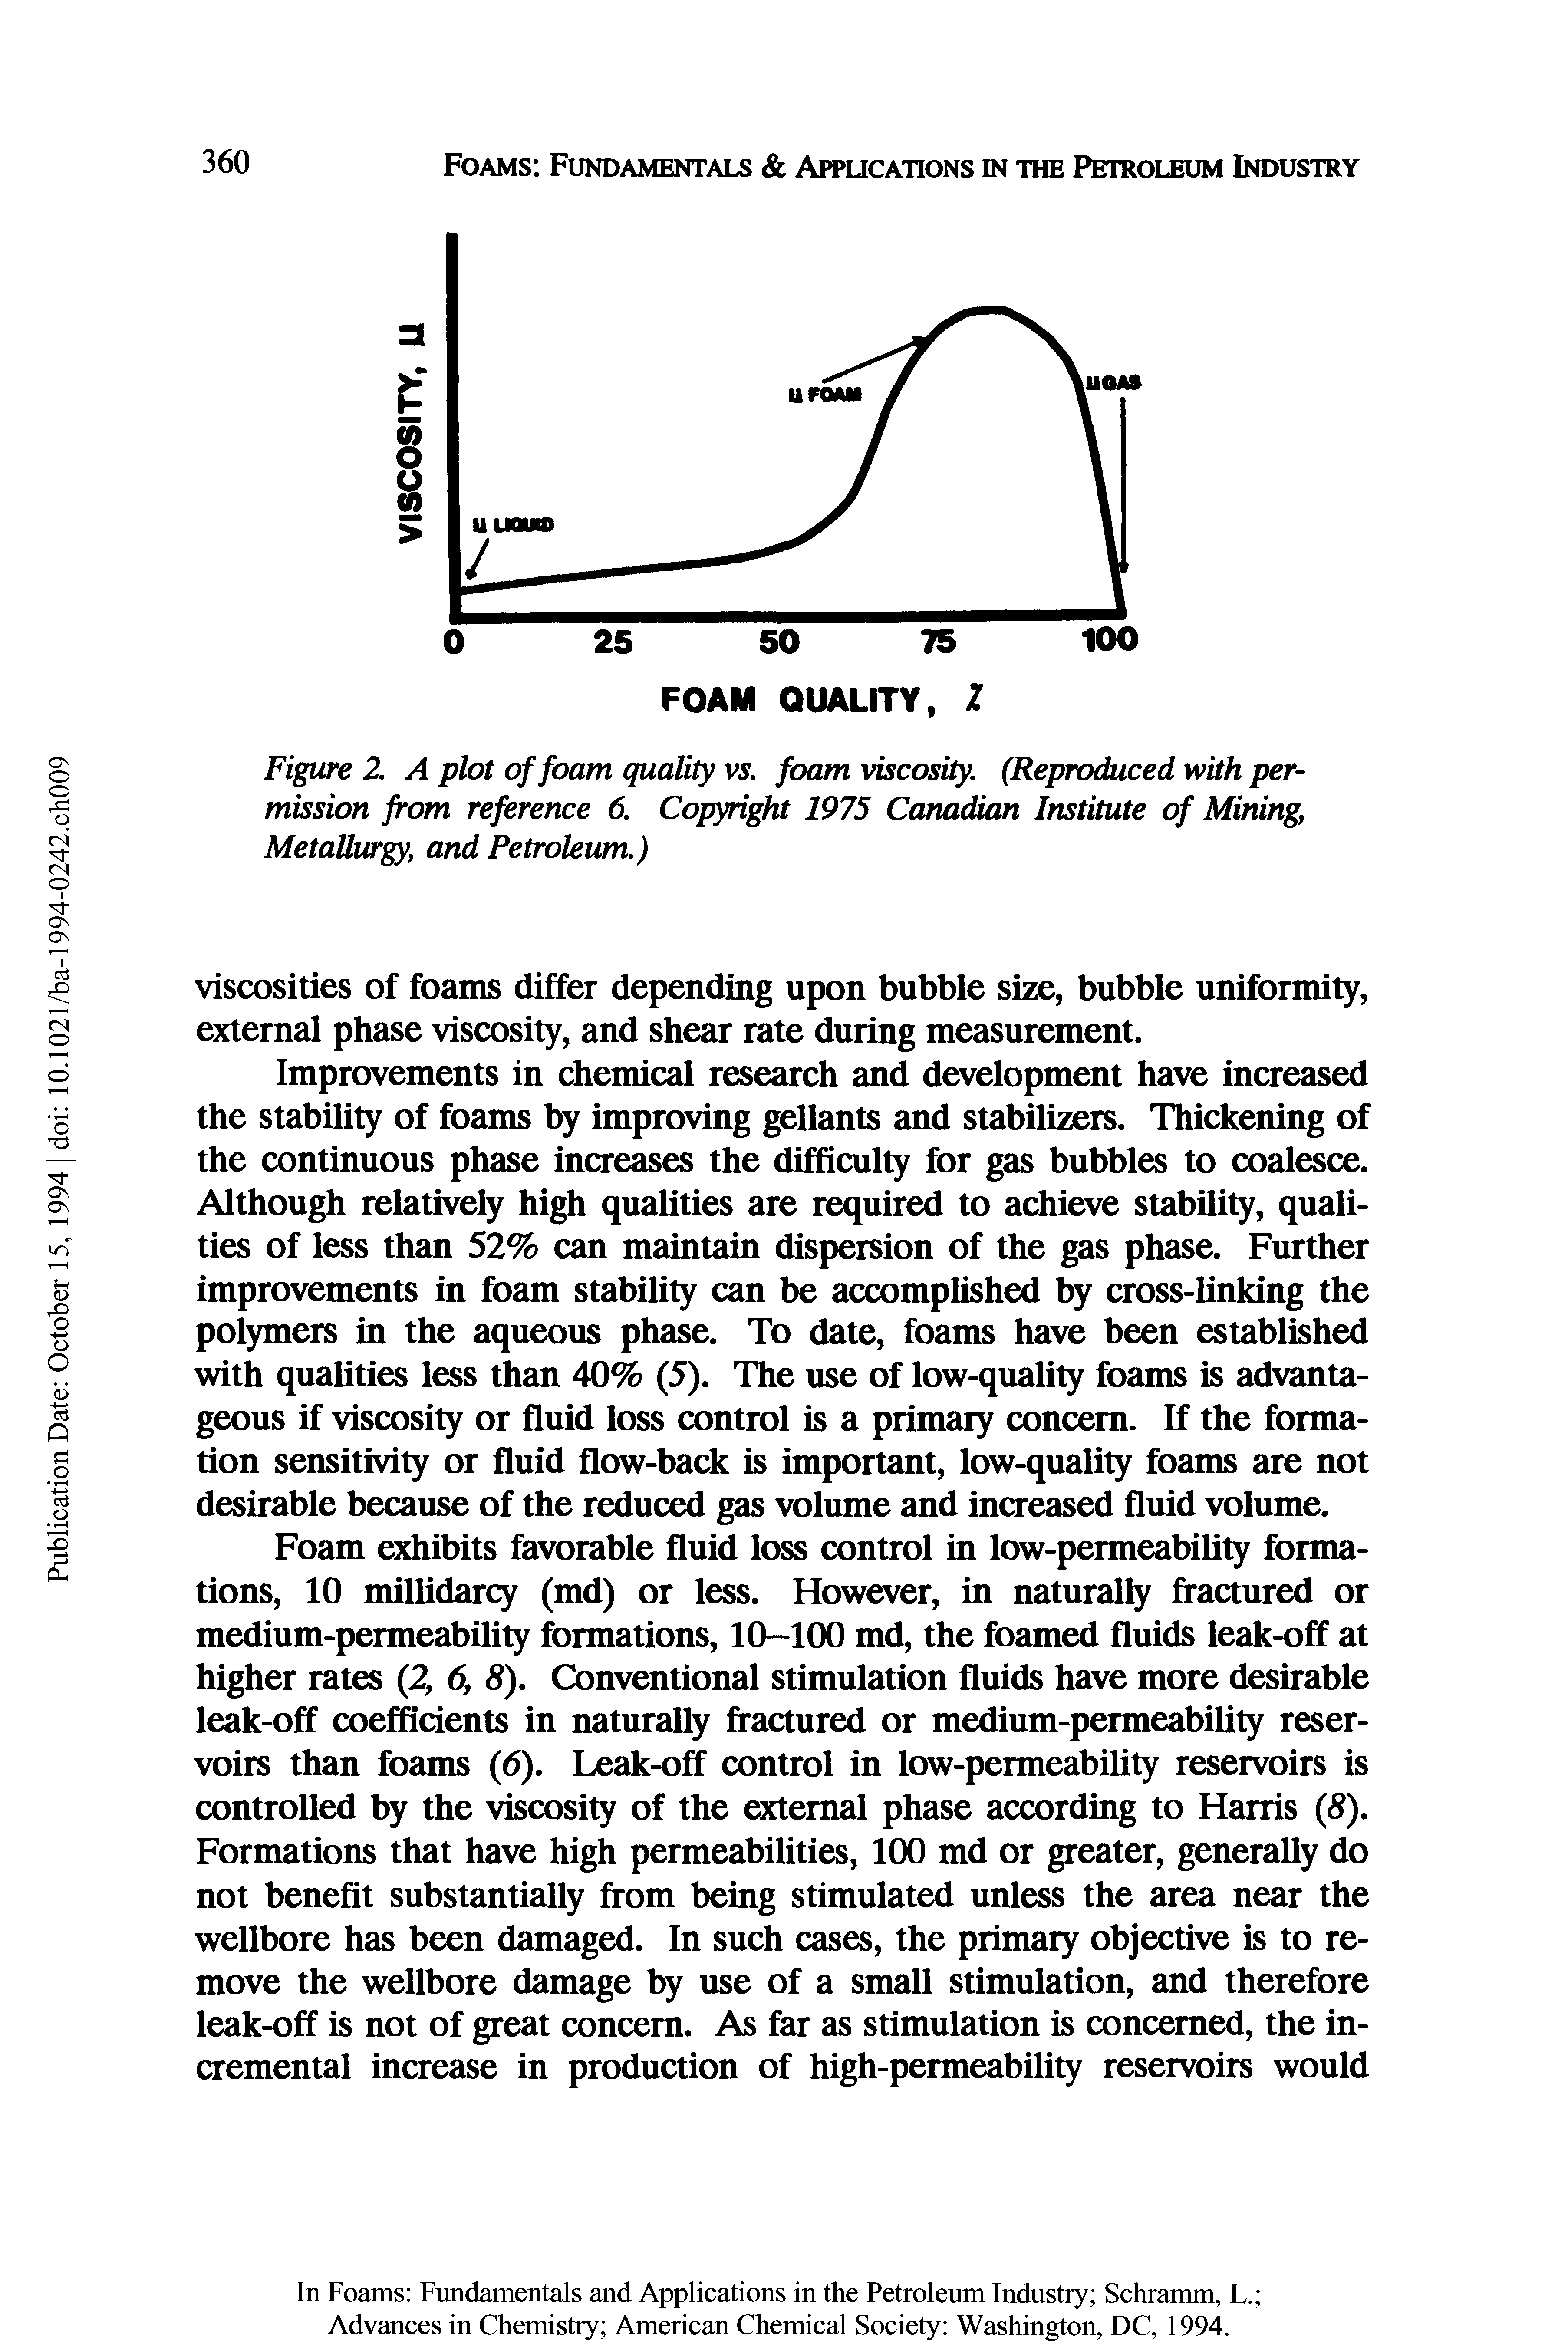 Figure 2 A plot of foam quality vs. foam viscosity. (Reproduced with permission from reference 6. Copyright 1975 Canadian Institute of Mining Metallurgy, and Petroleum.)...